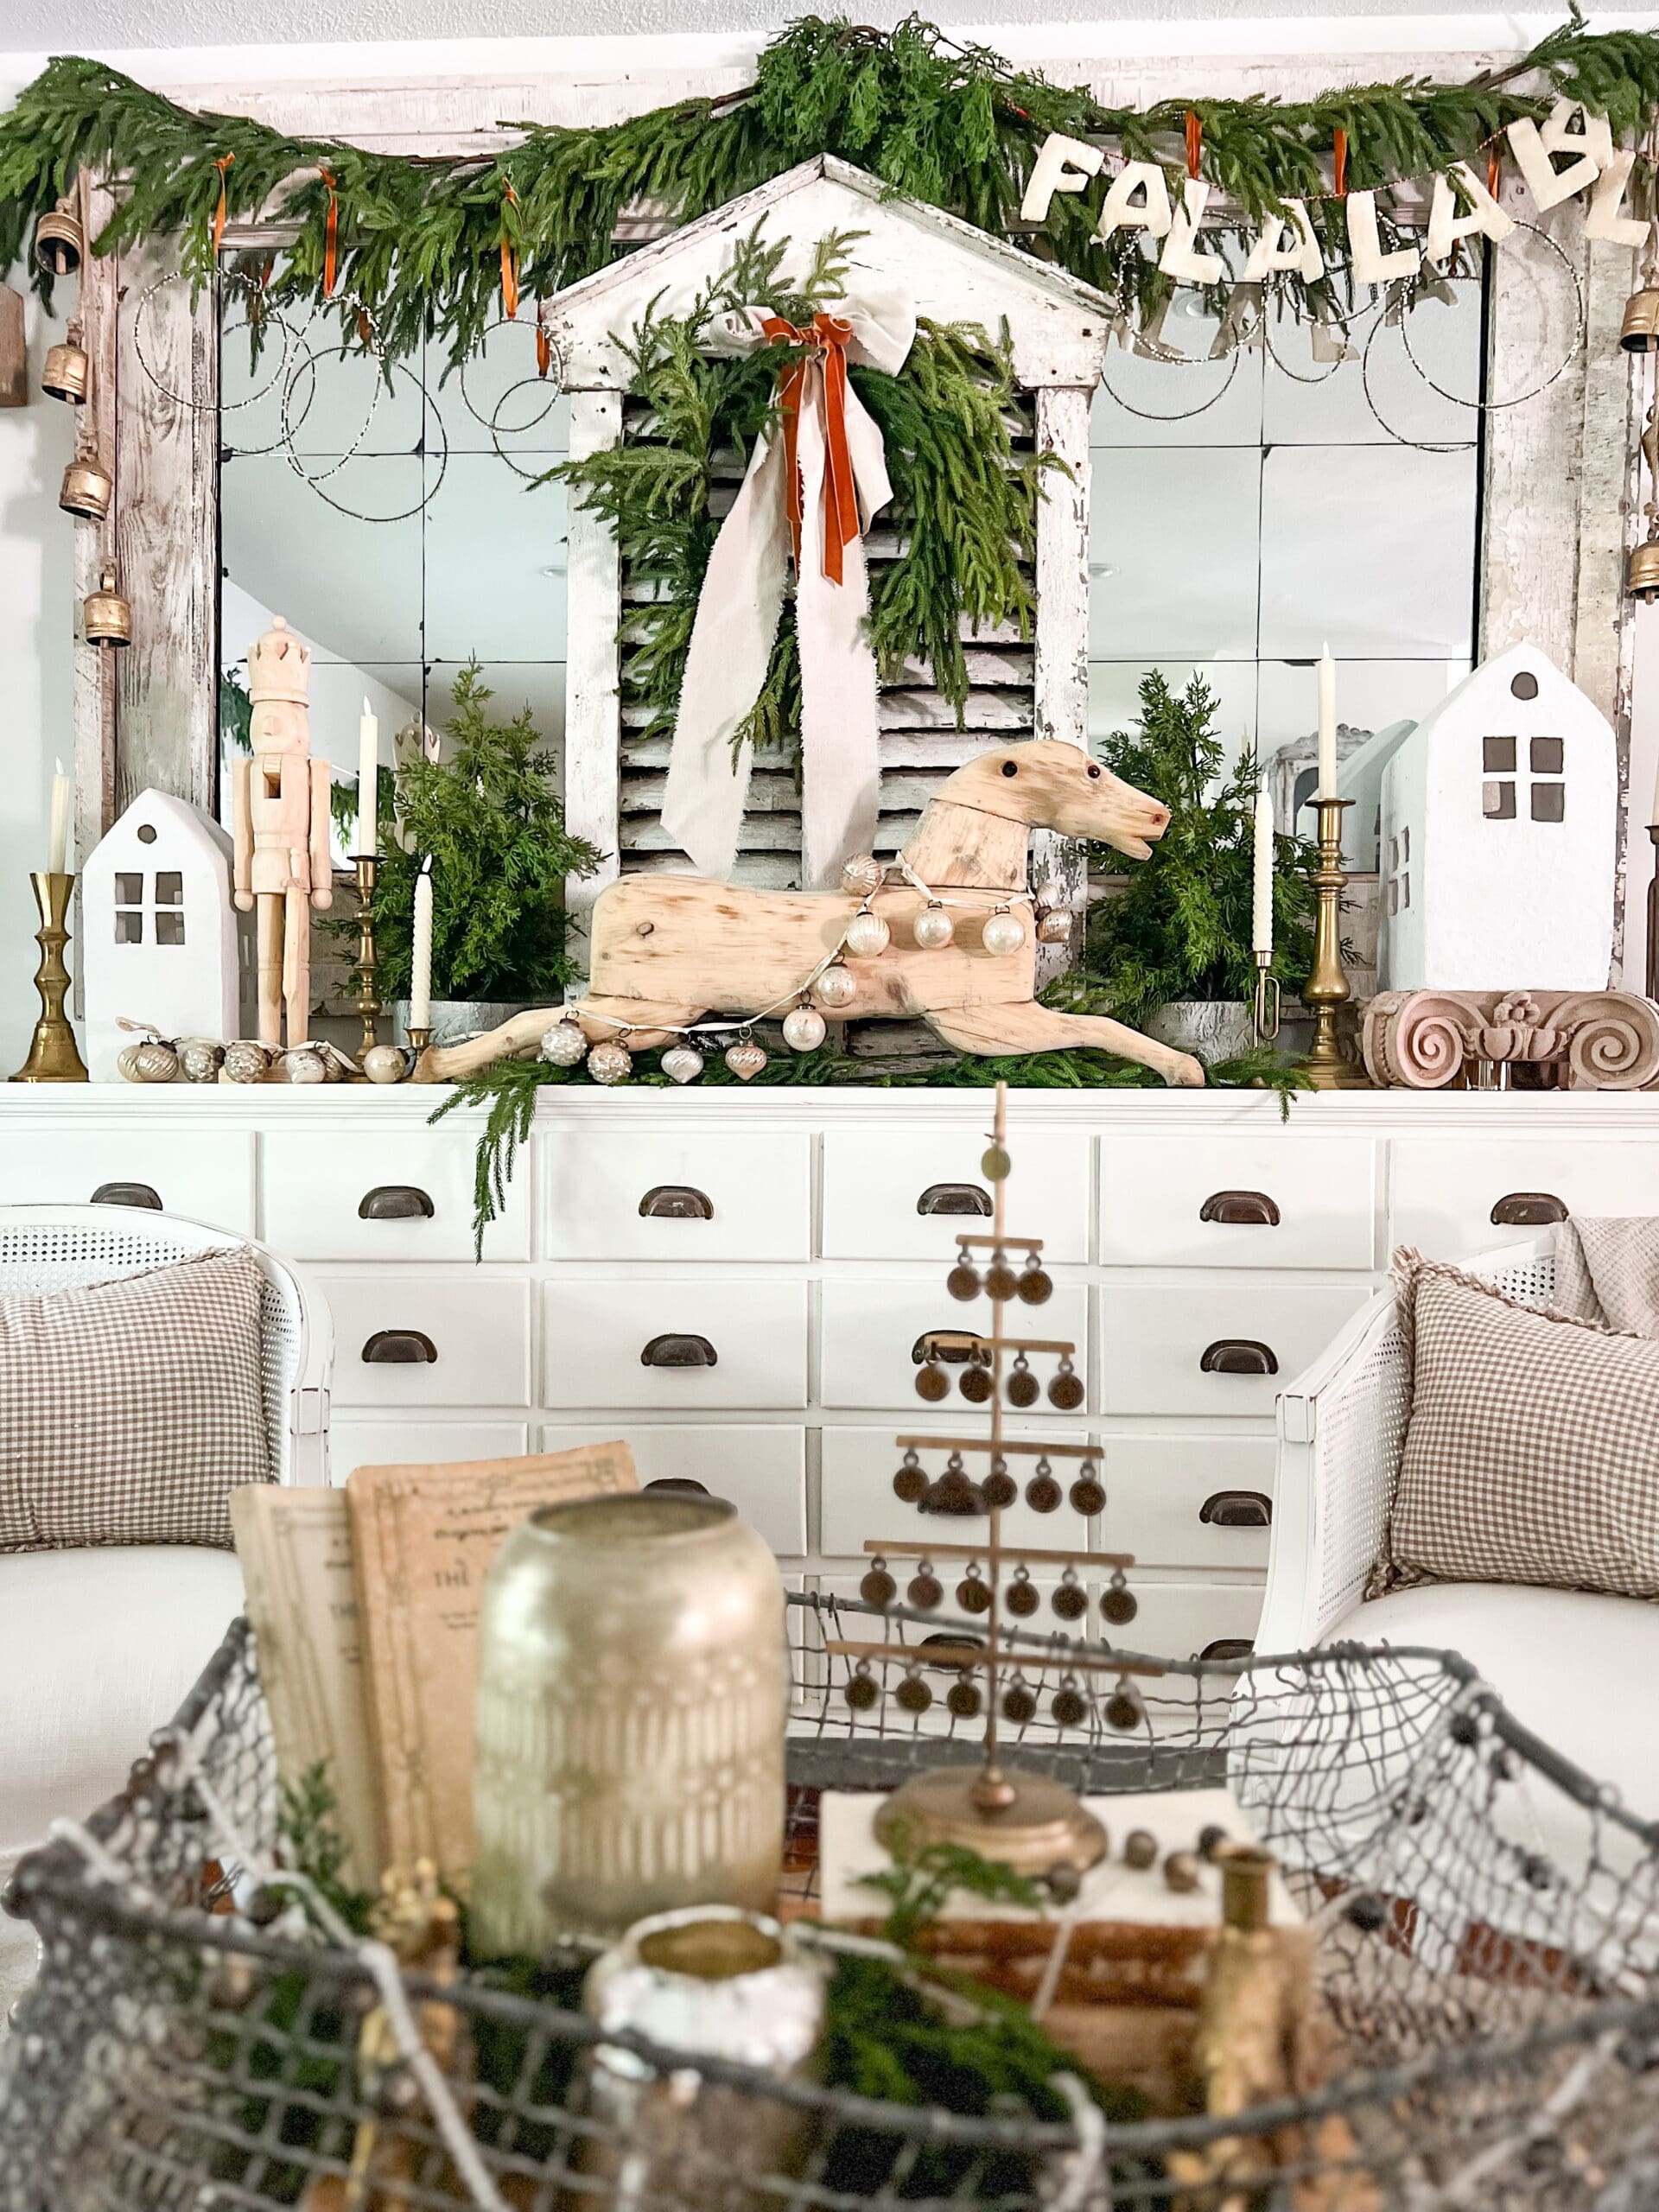 large white apothecary styled with greenery and a large wooden rocking horse